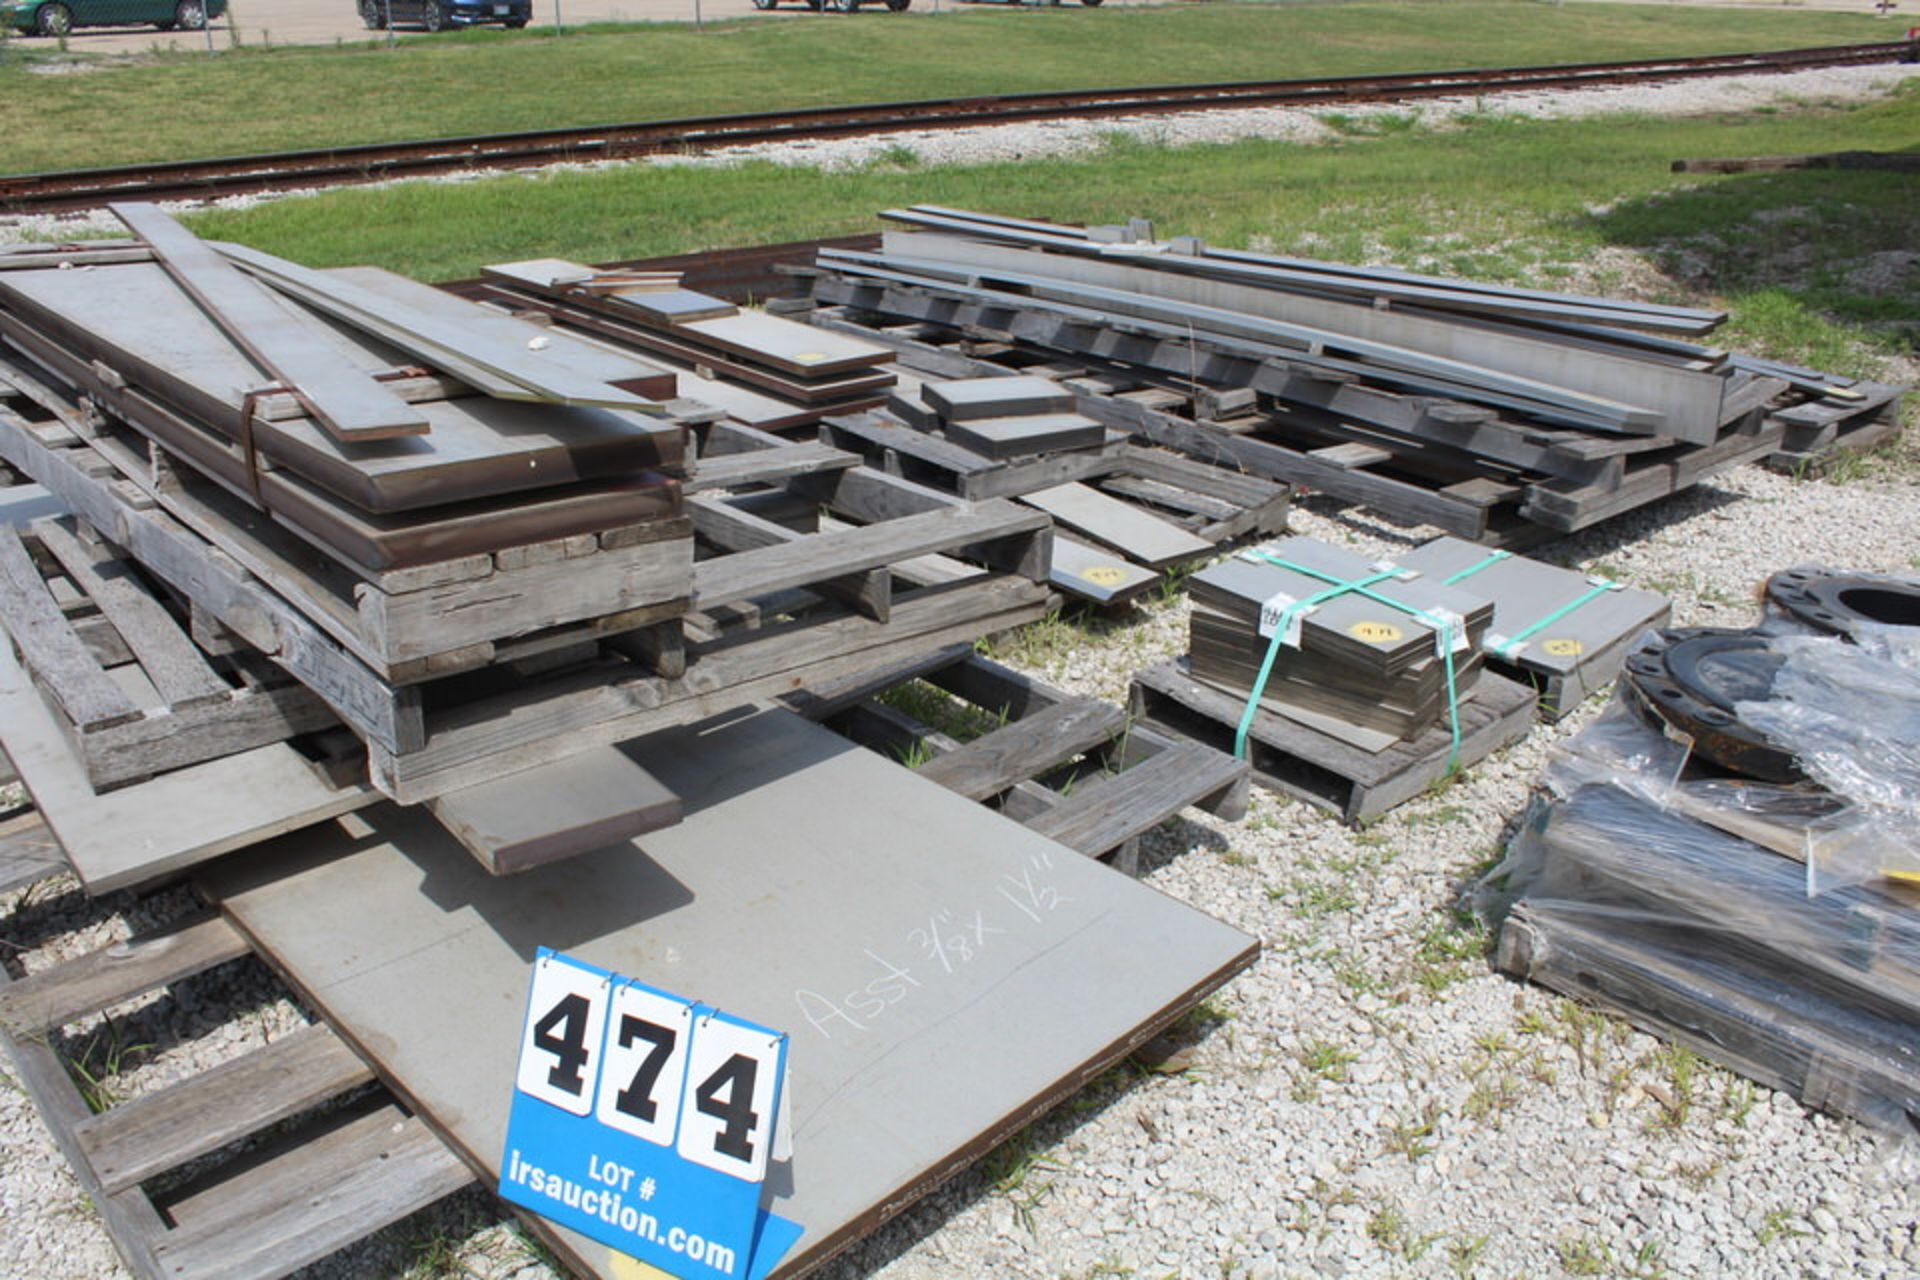 ASST 3/8" X 1 1/2" CARBON STEEL PLATE (Location: 5202 West Channel Rd, Catoosa, OK 74015)